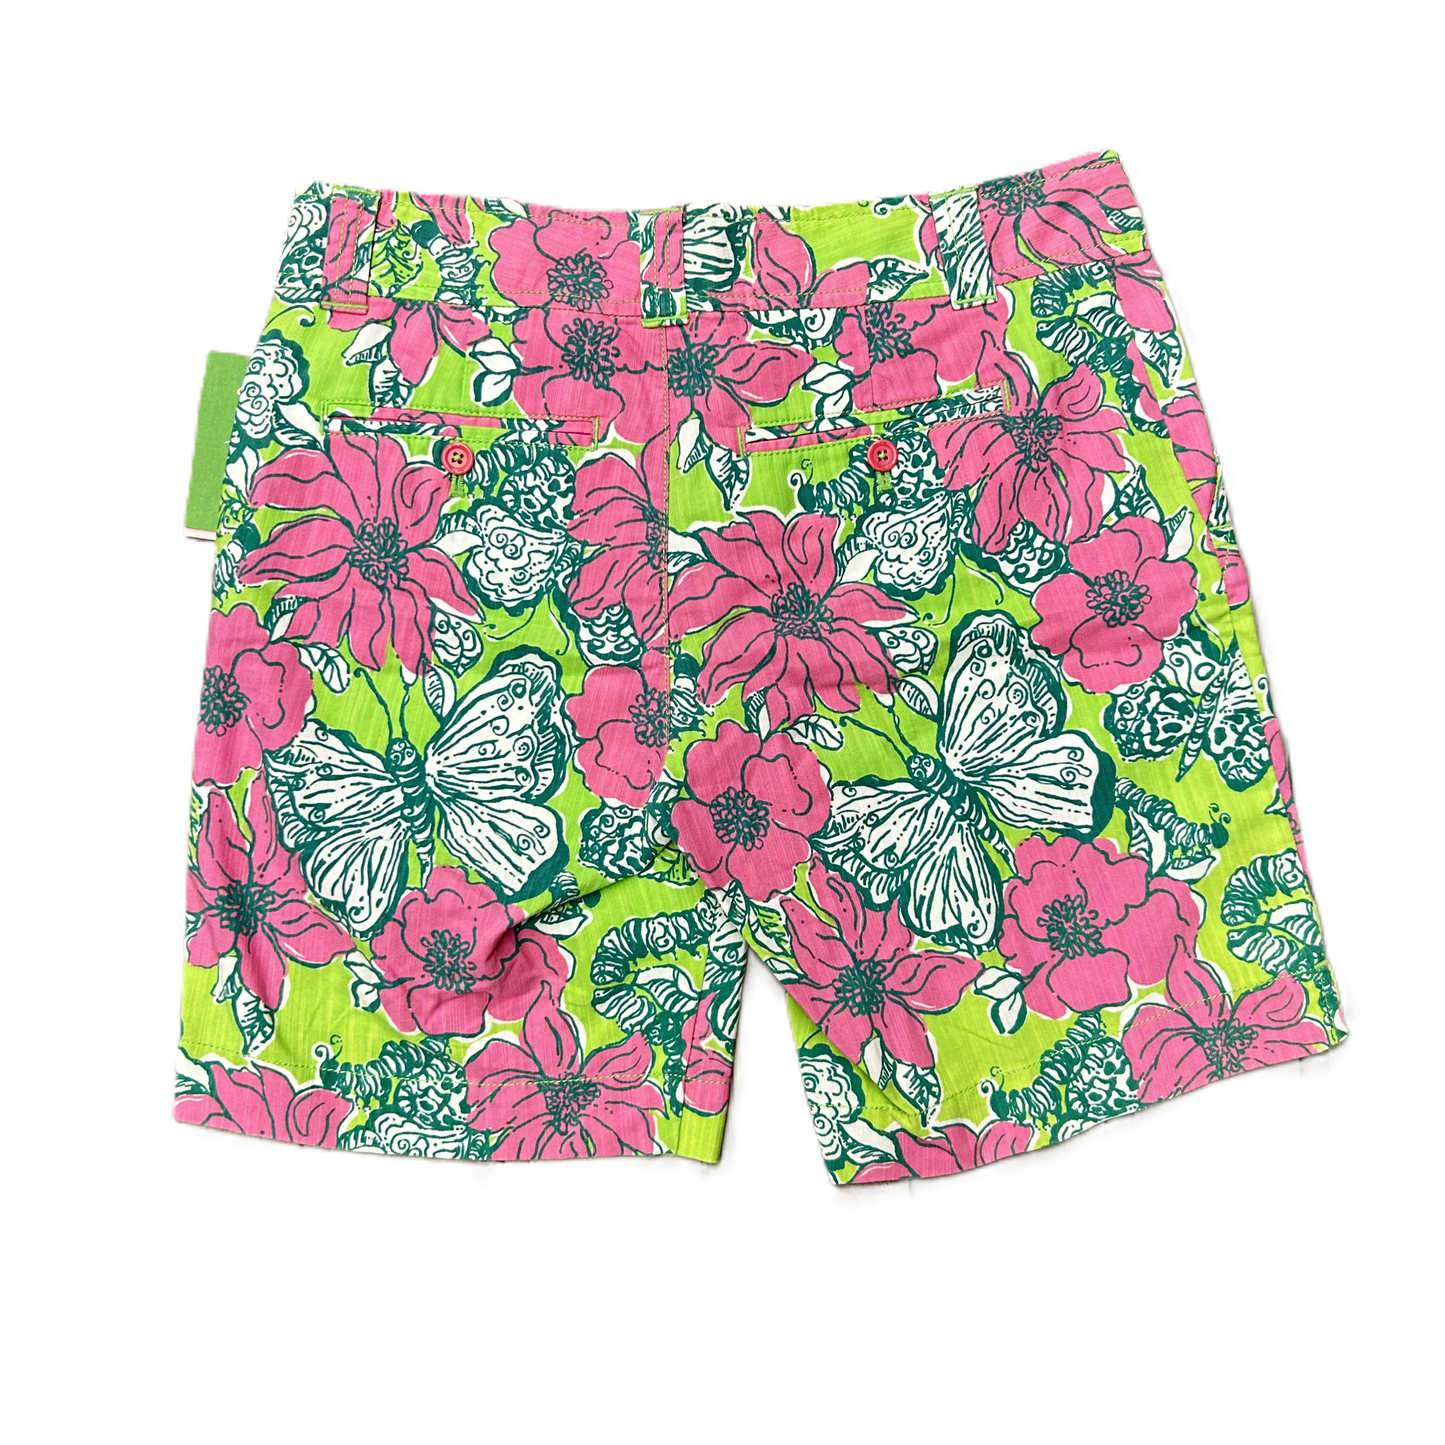 Green & Pink Shorts Designer By Lilly Pulitzer, Size: 4